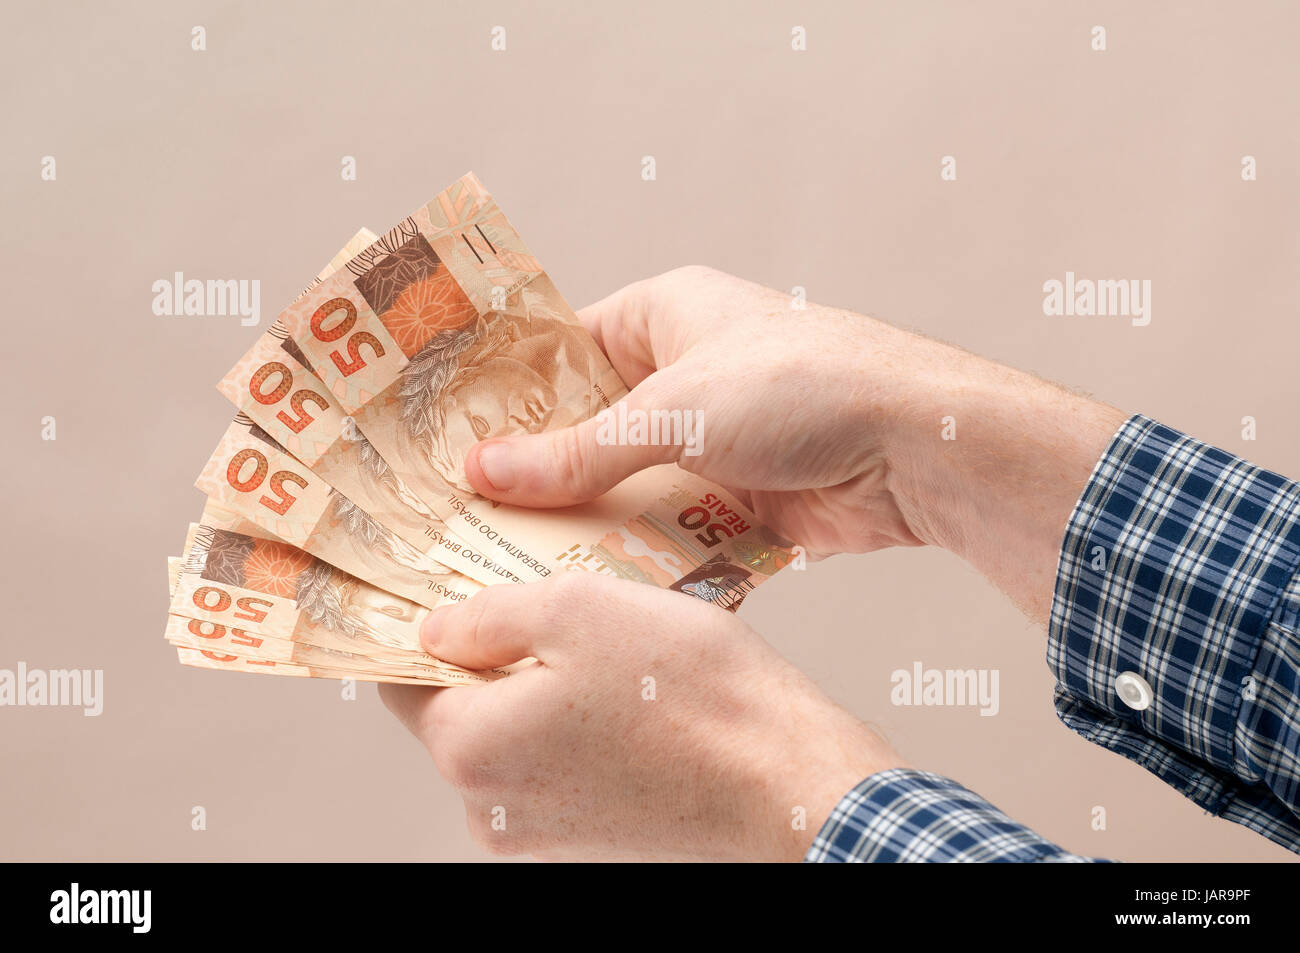 Brazilian Currency - Real Stock Photo